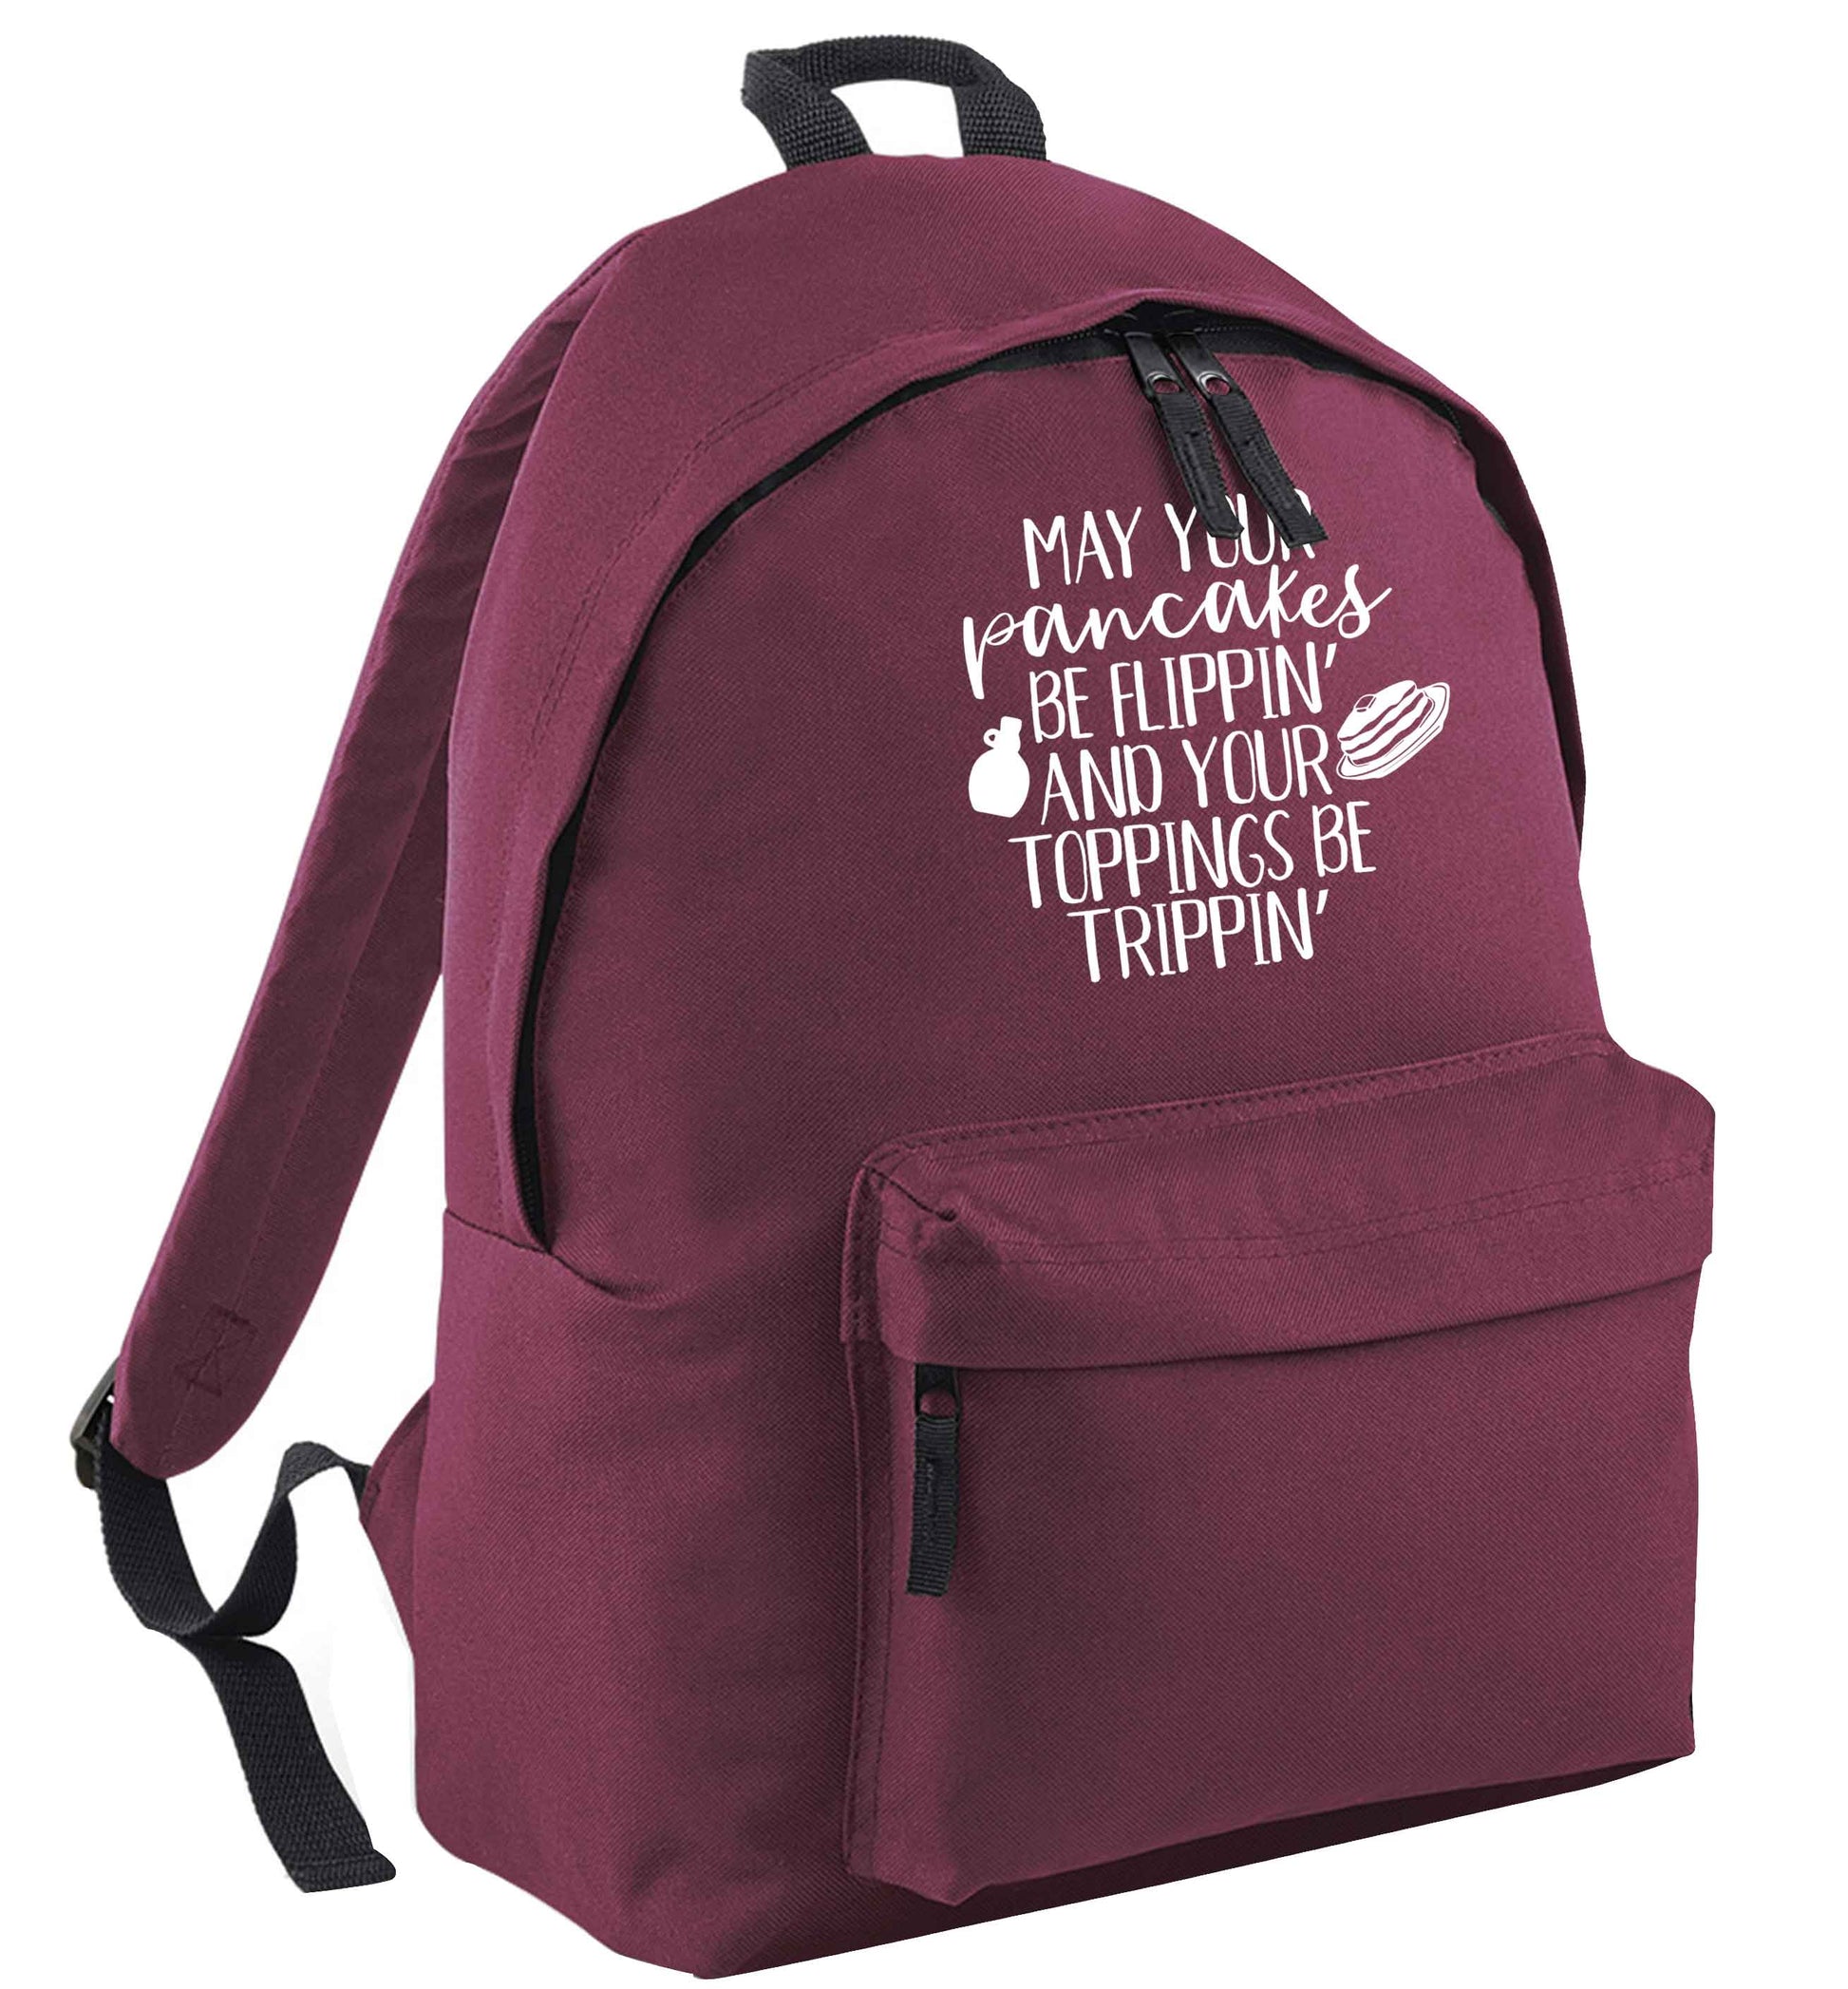 May your pancakes be flippin' and your toppings be trippin' black childrens backpack